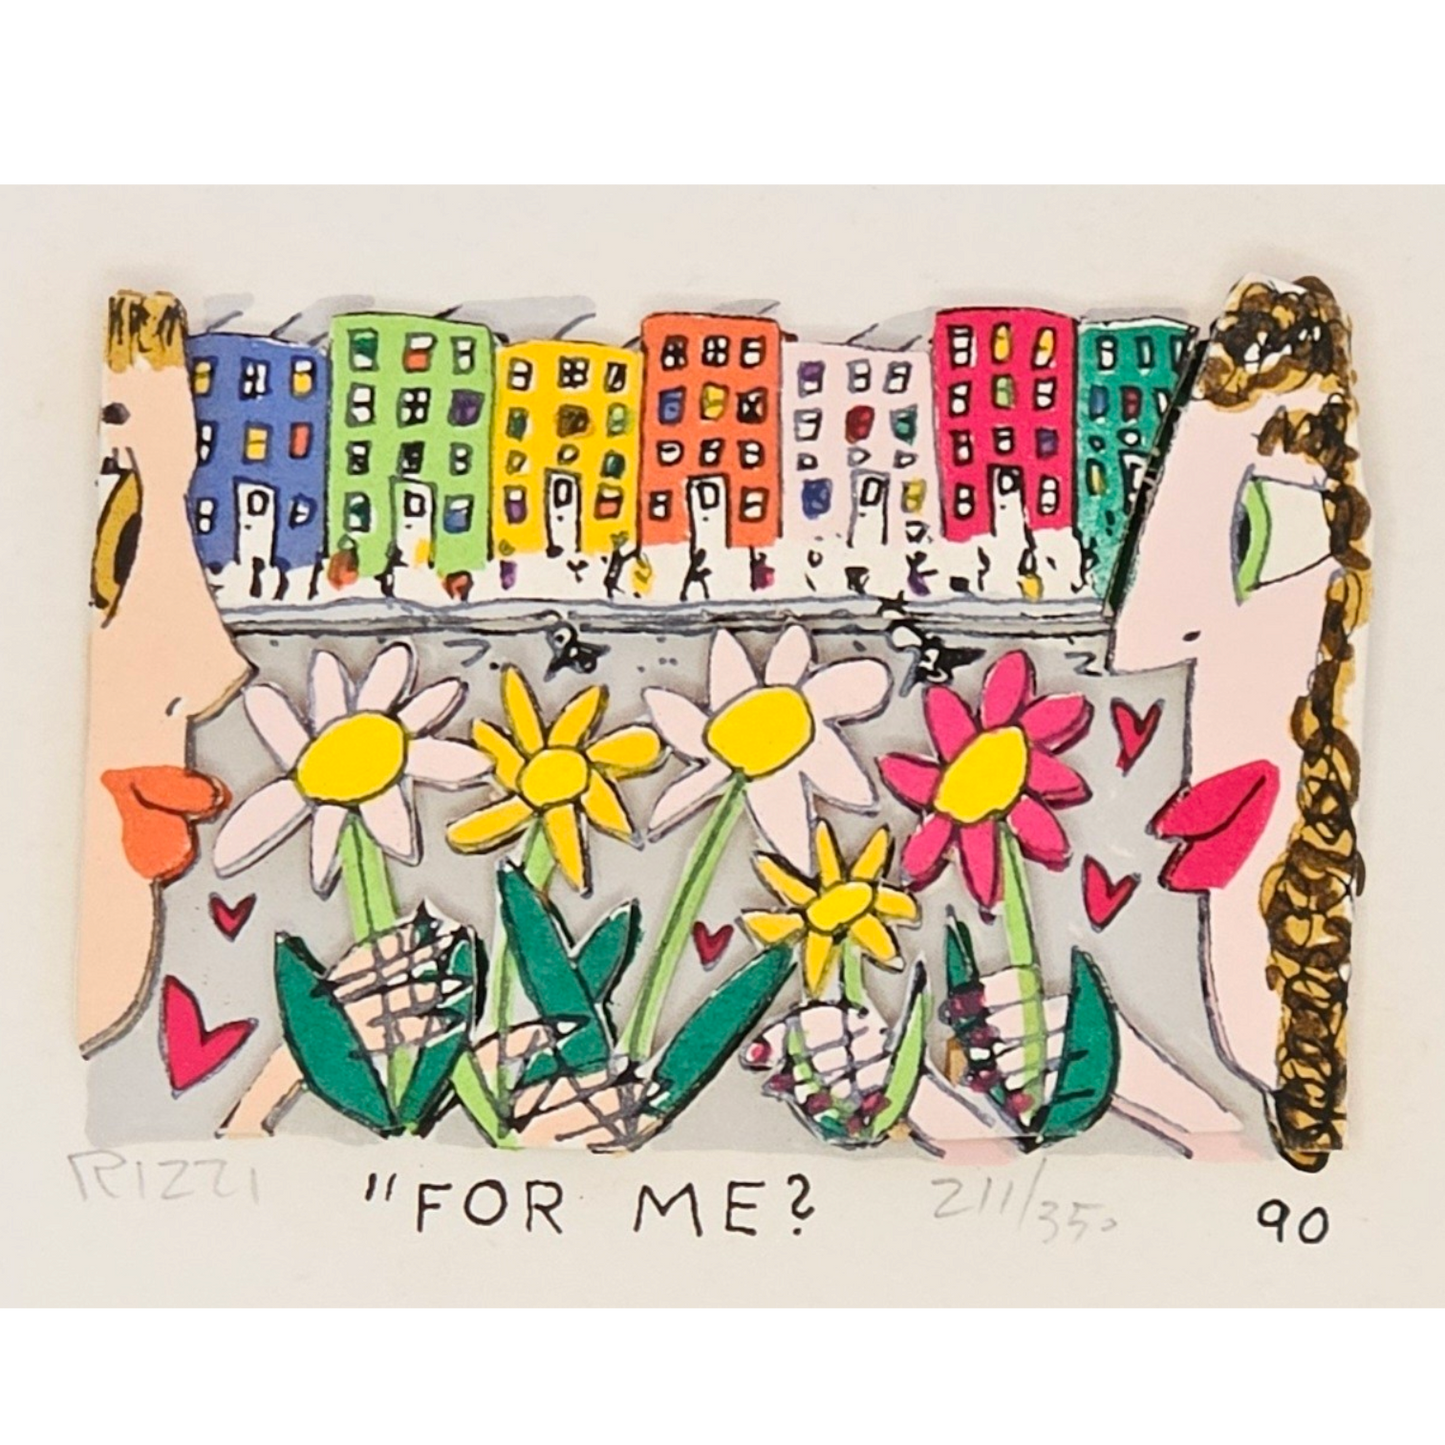 James Rizzi - For Me? (1990)